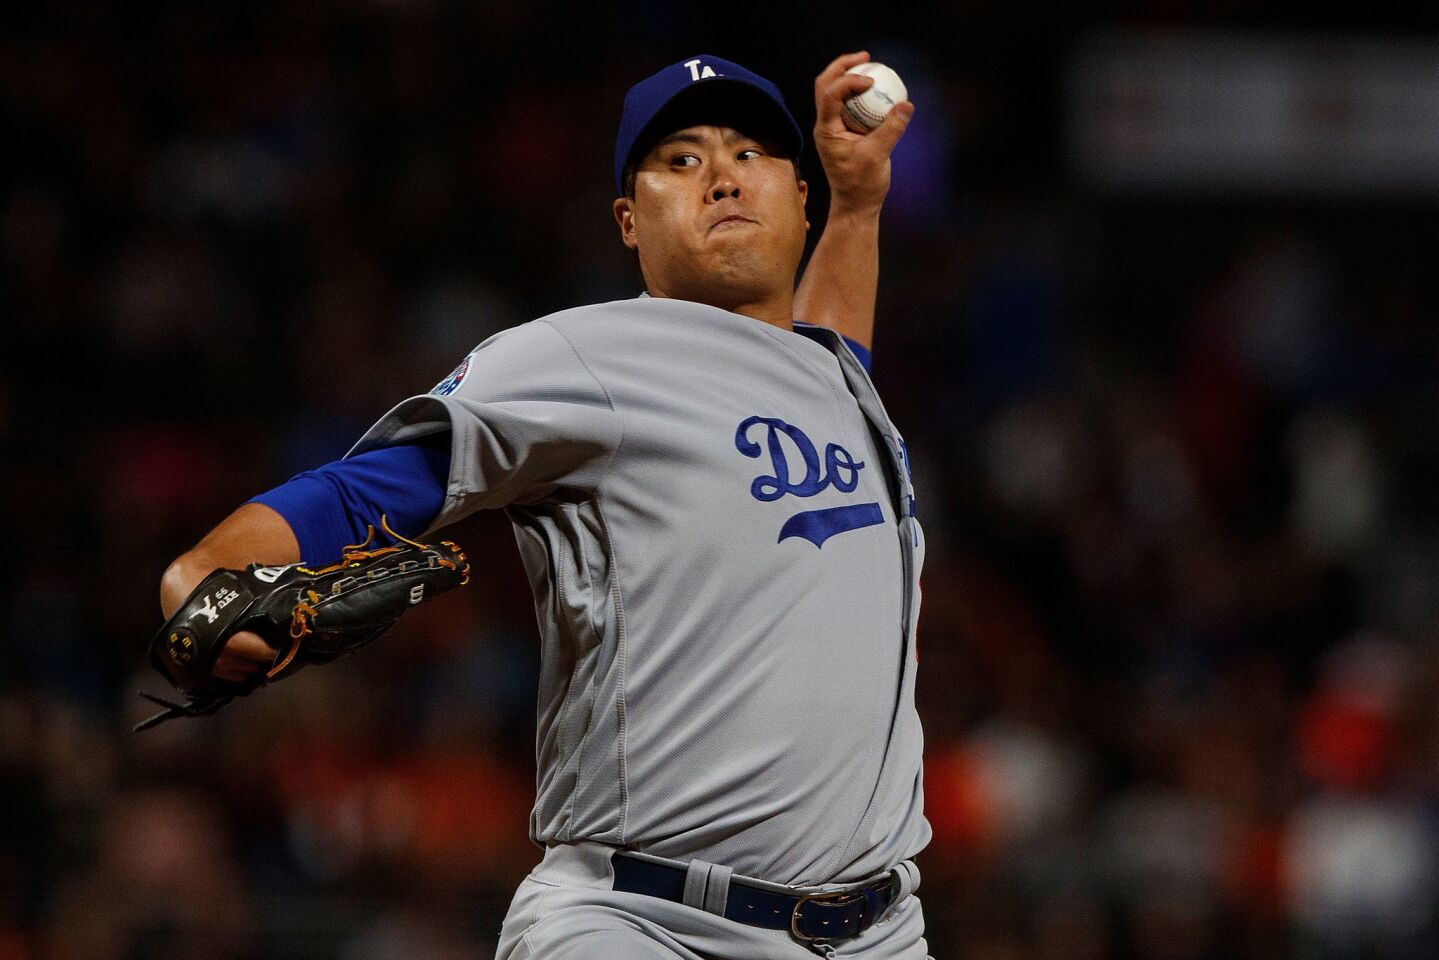 SAN FRANCISCO, CA - SEPTEMBER 28: Hyun-Jin Ryu #99 of the Los Angeles Dodgers pitches against the San Francisco Giants during the first inning at AT&T Park on September 28, 2018 in San Francisco, California. (Photo by Jason O. Watson/Getty Images) ** OUTS - ELSENT, FPG, CM - OUTS * NM, PH, VA if sourced by CT, LA or MoD **